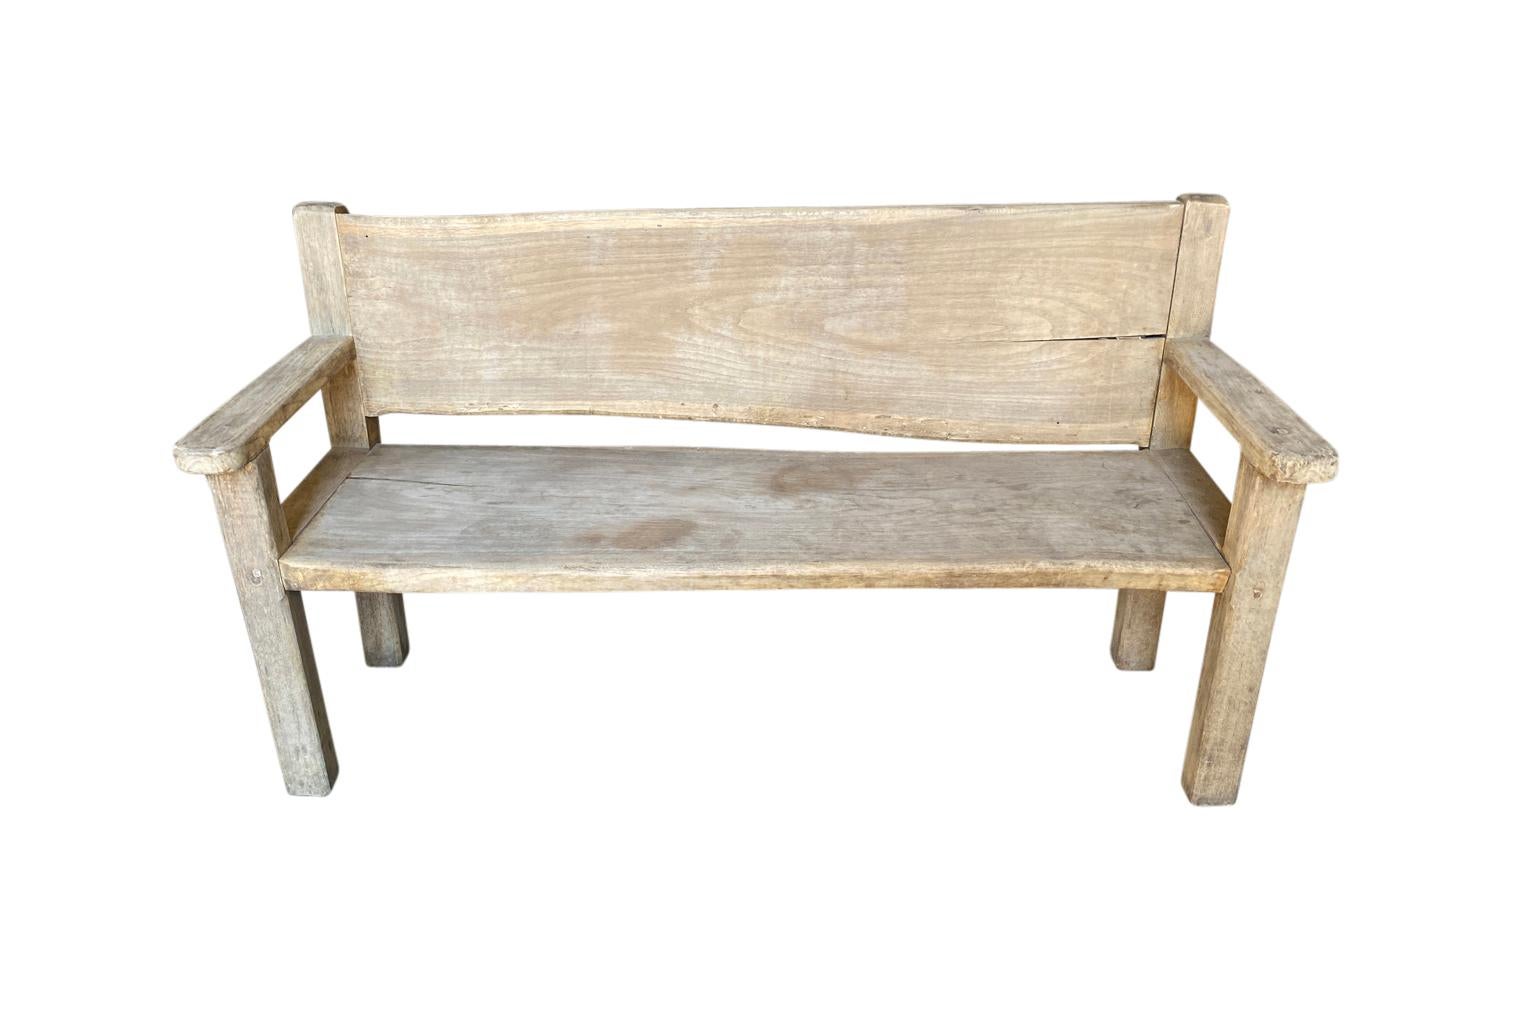 A charming 19th century rustic bench from Northern Italy. Soundly constructed from chestnut. Wonderful for any modern or rustic environment. The seat height is 18 1/2